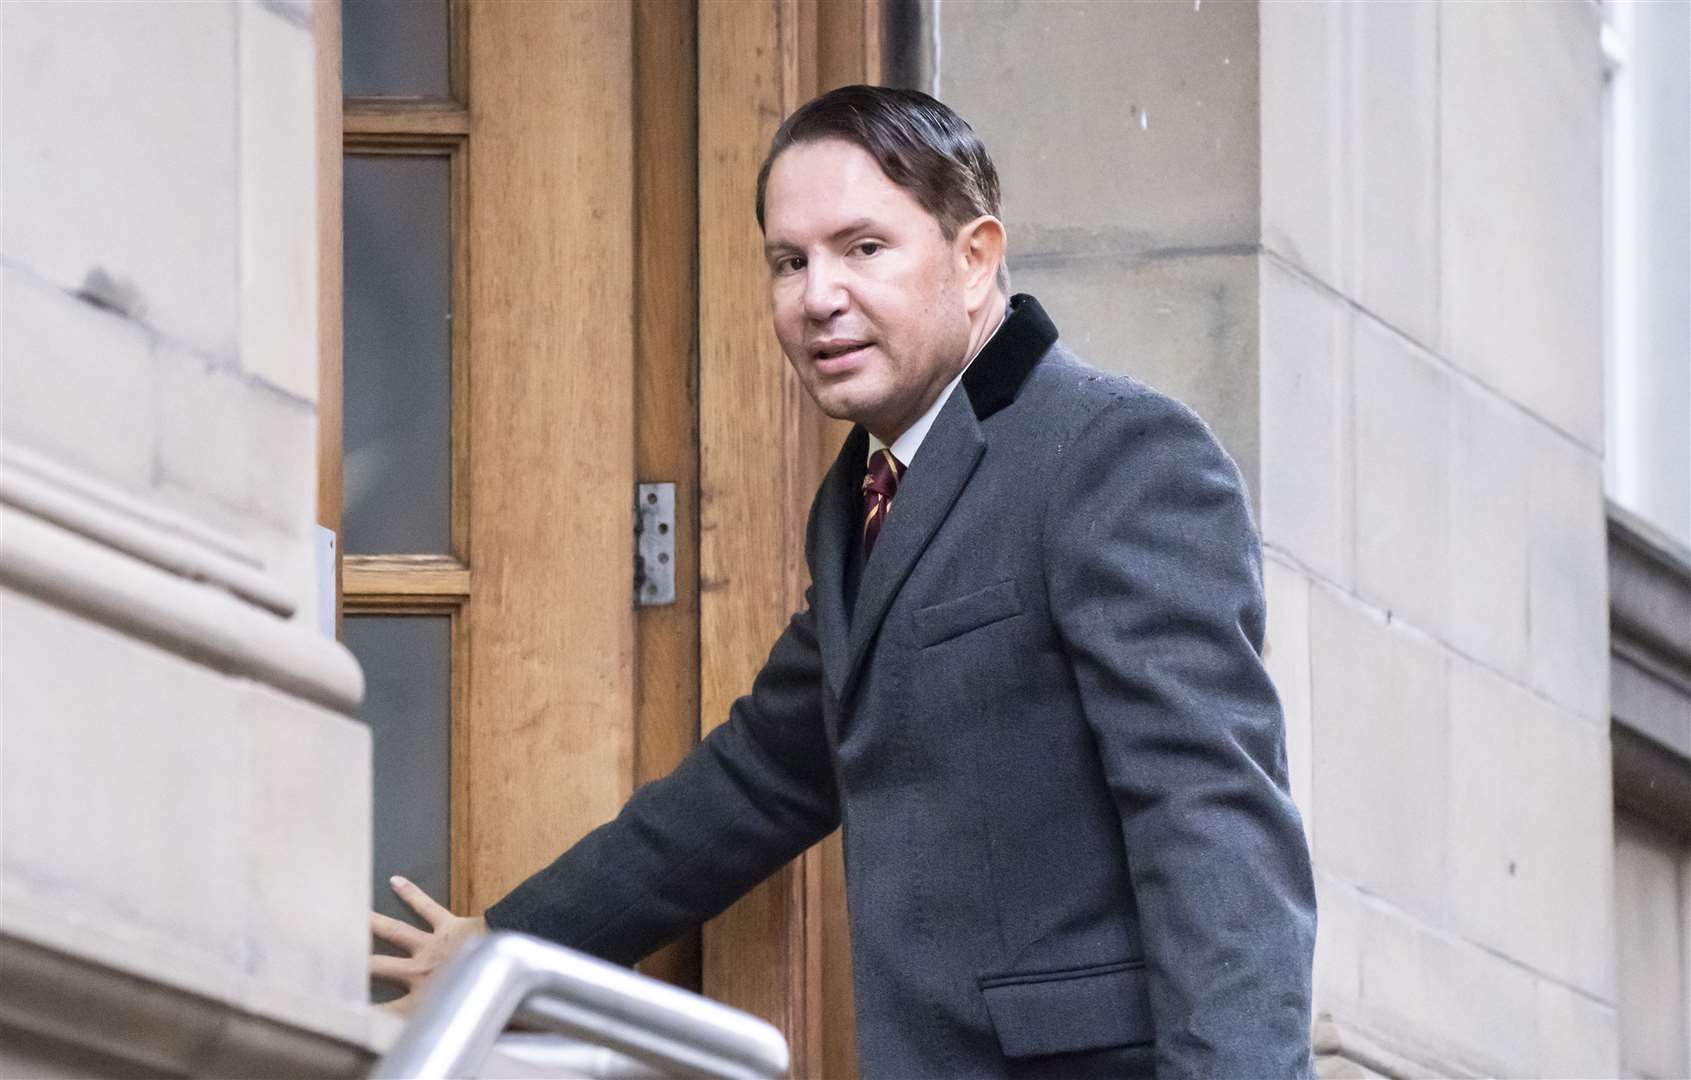 Socialite James Stunt arrives at an earlier hearing at Leeds Cloth Hall Court (PA)